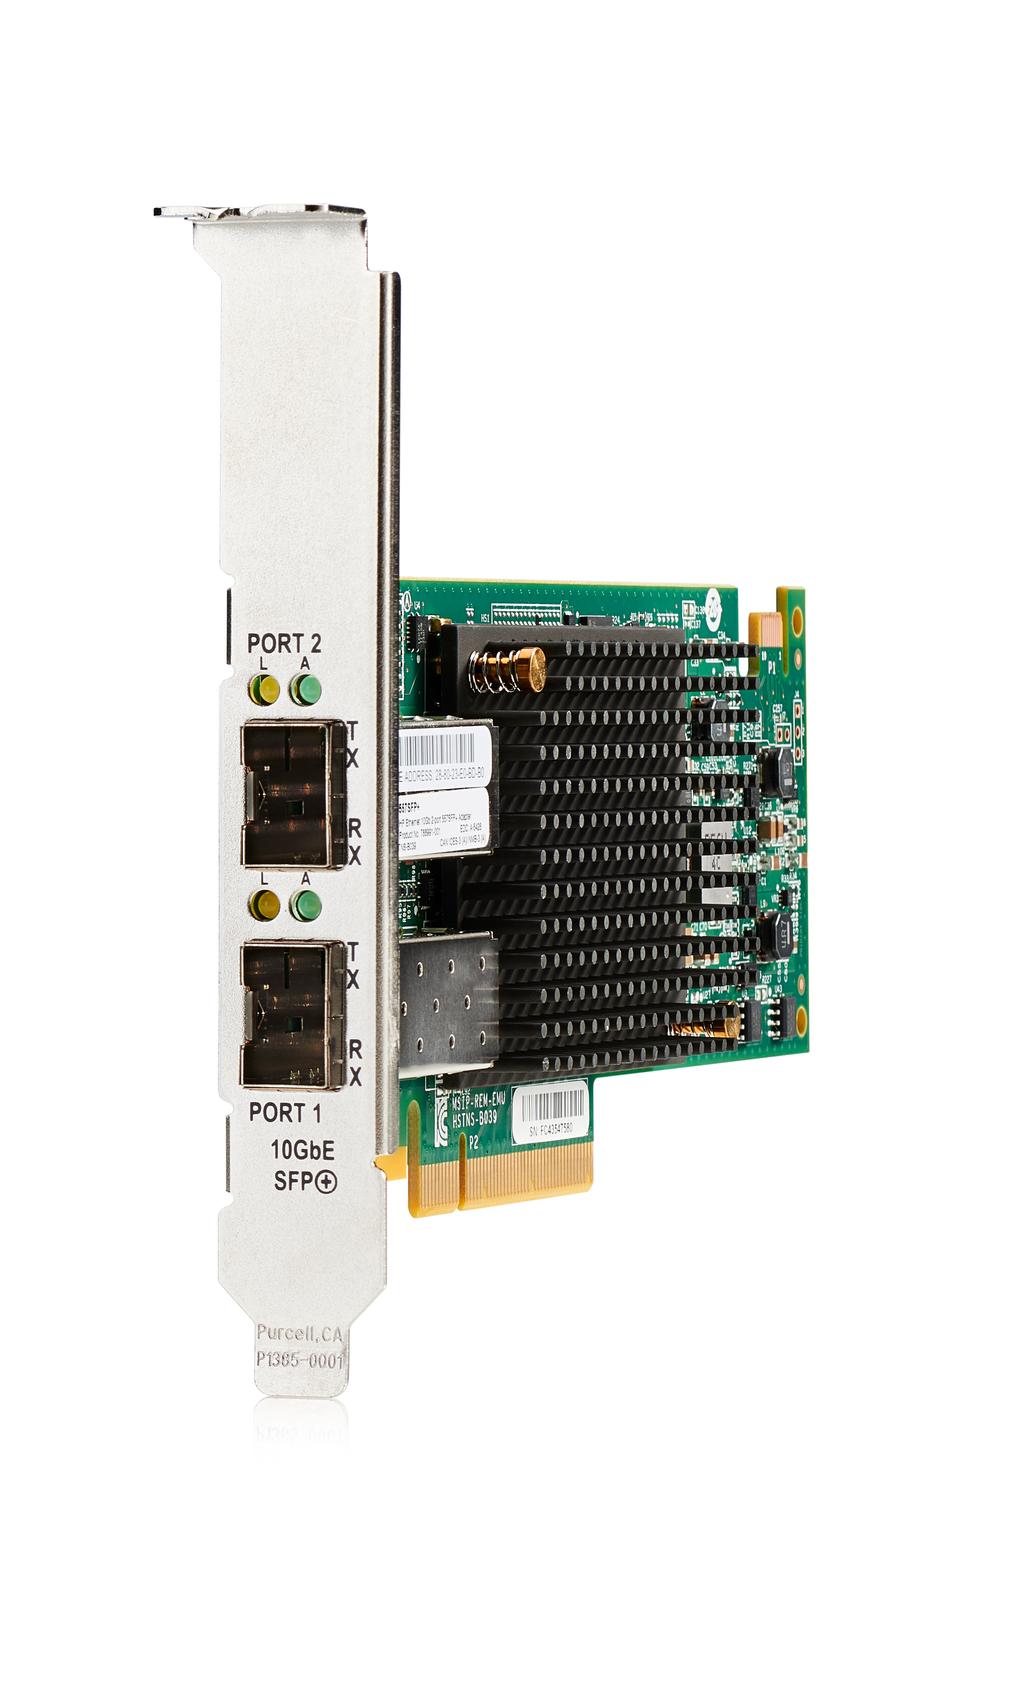 Overview Overview The HPE Ethernet 10Gb 2-port 557SFP+ adapter for ProLiant Gen9 rack servers provides full-featured, high performance, converged 10 Gb Ethernet that accelerates IT services and